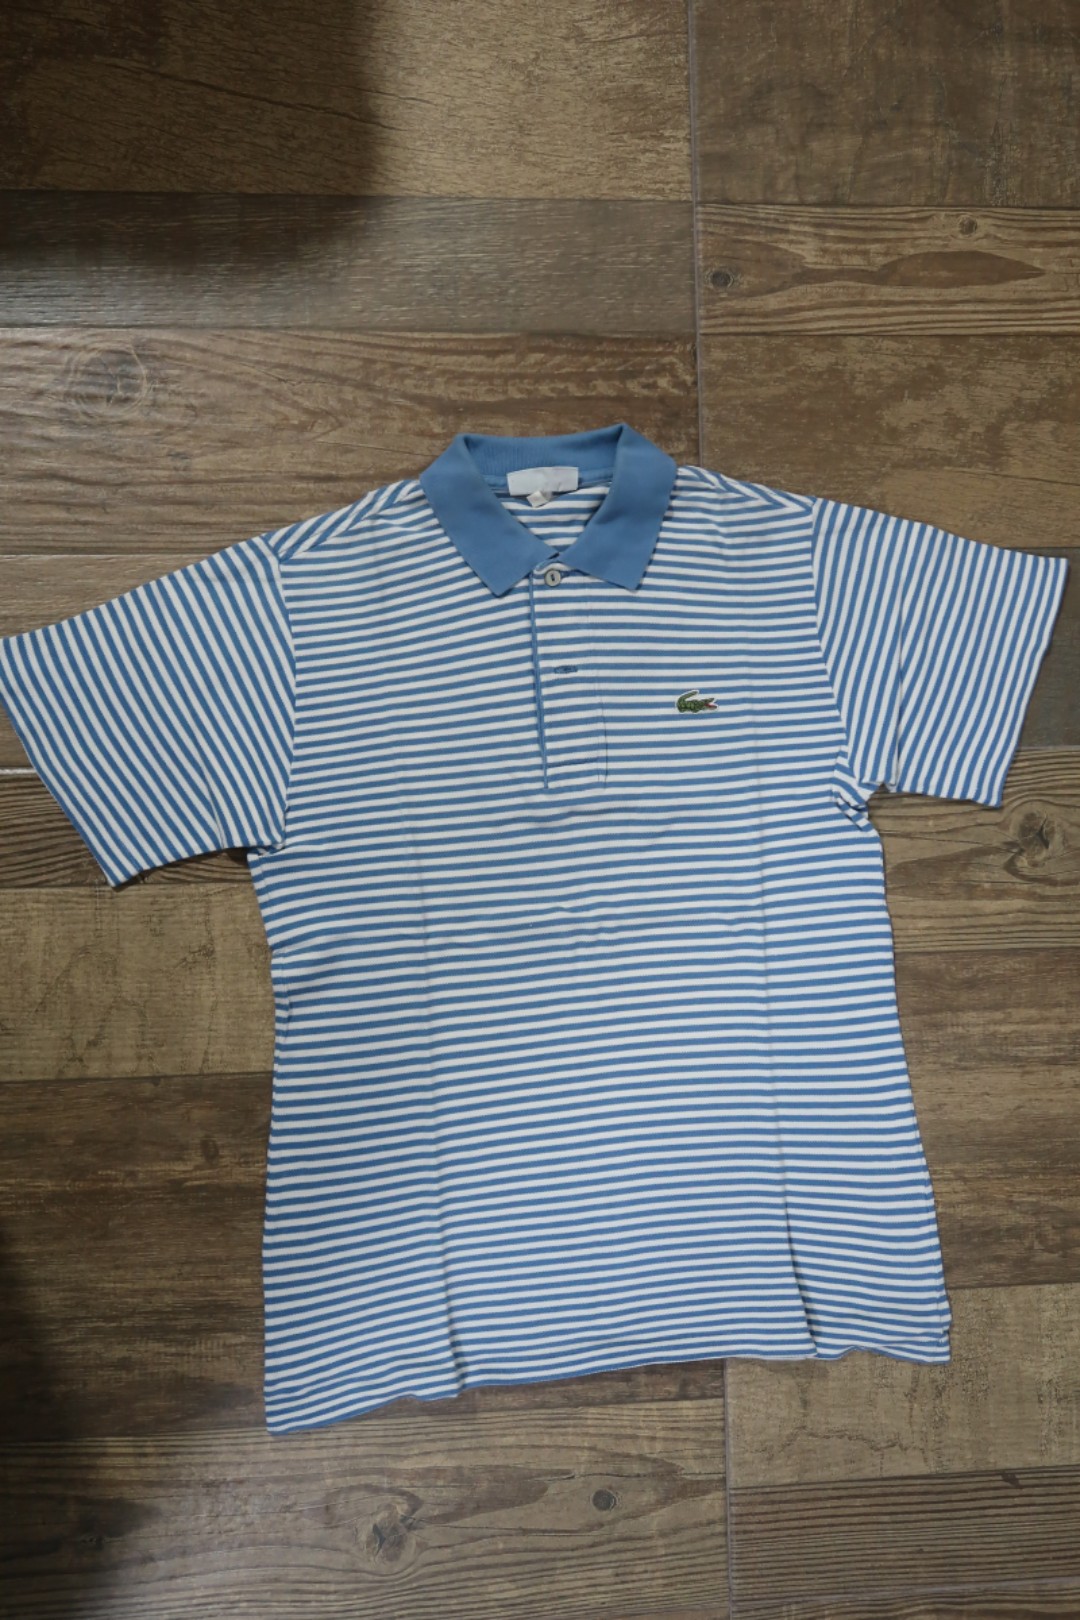 lacoste blue and white striped shirt